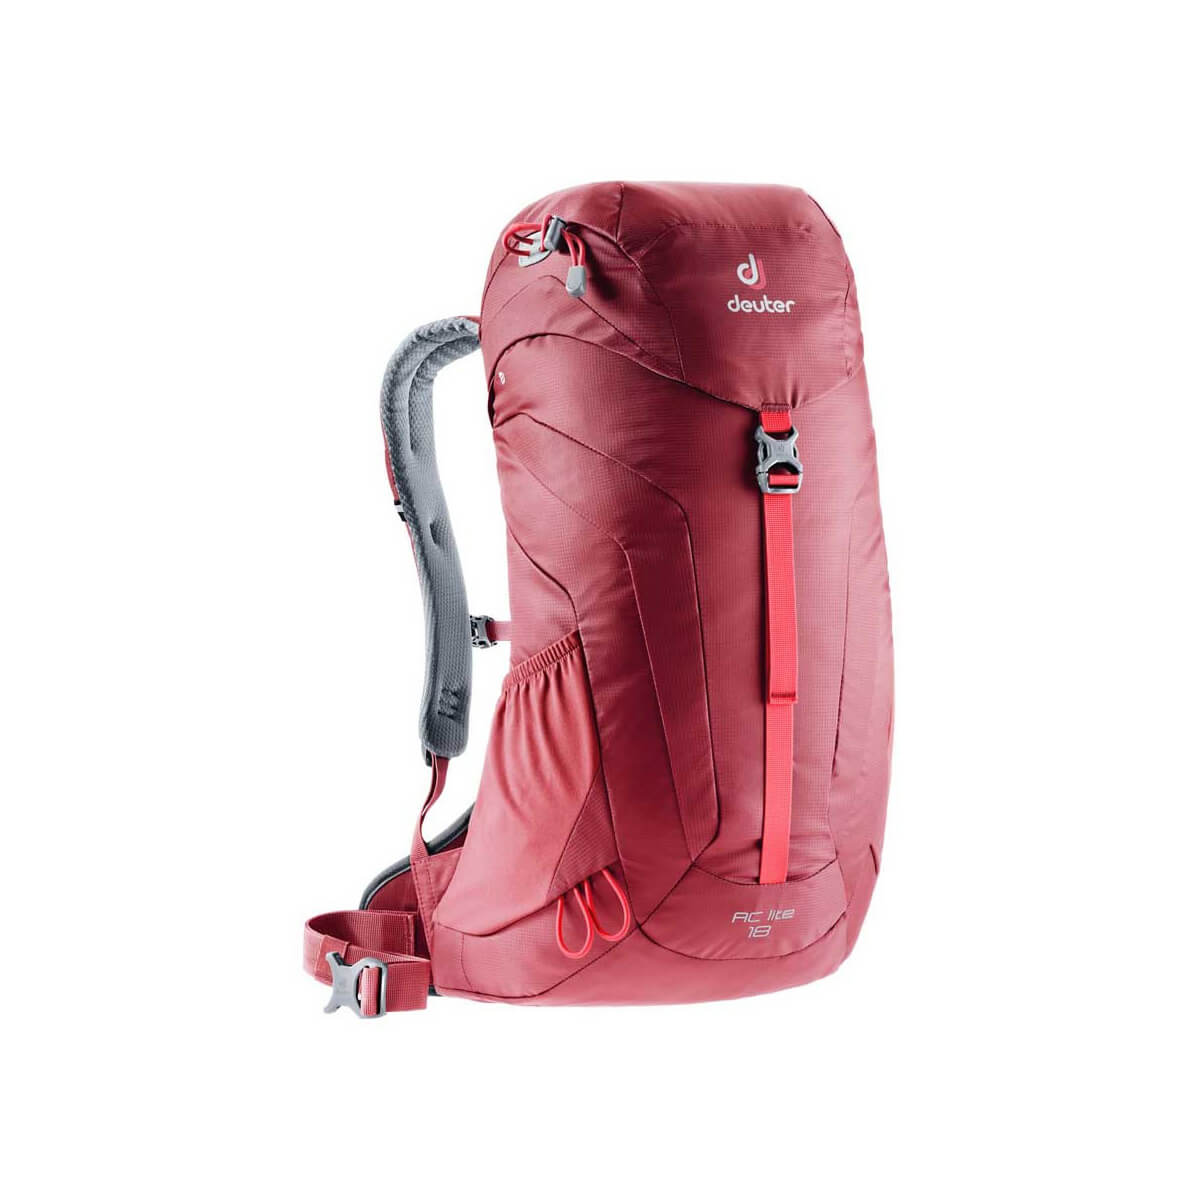 Deuter Unisex AC Lite 18 Backpack Red Sports Outdoors Breathable Reflective 